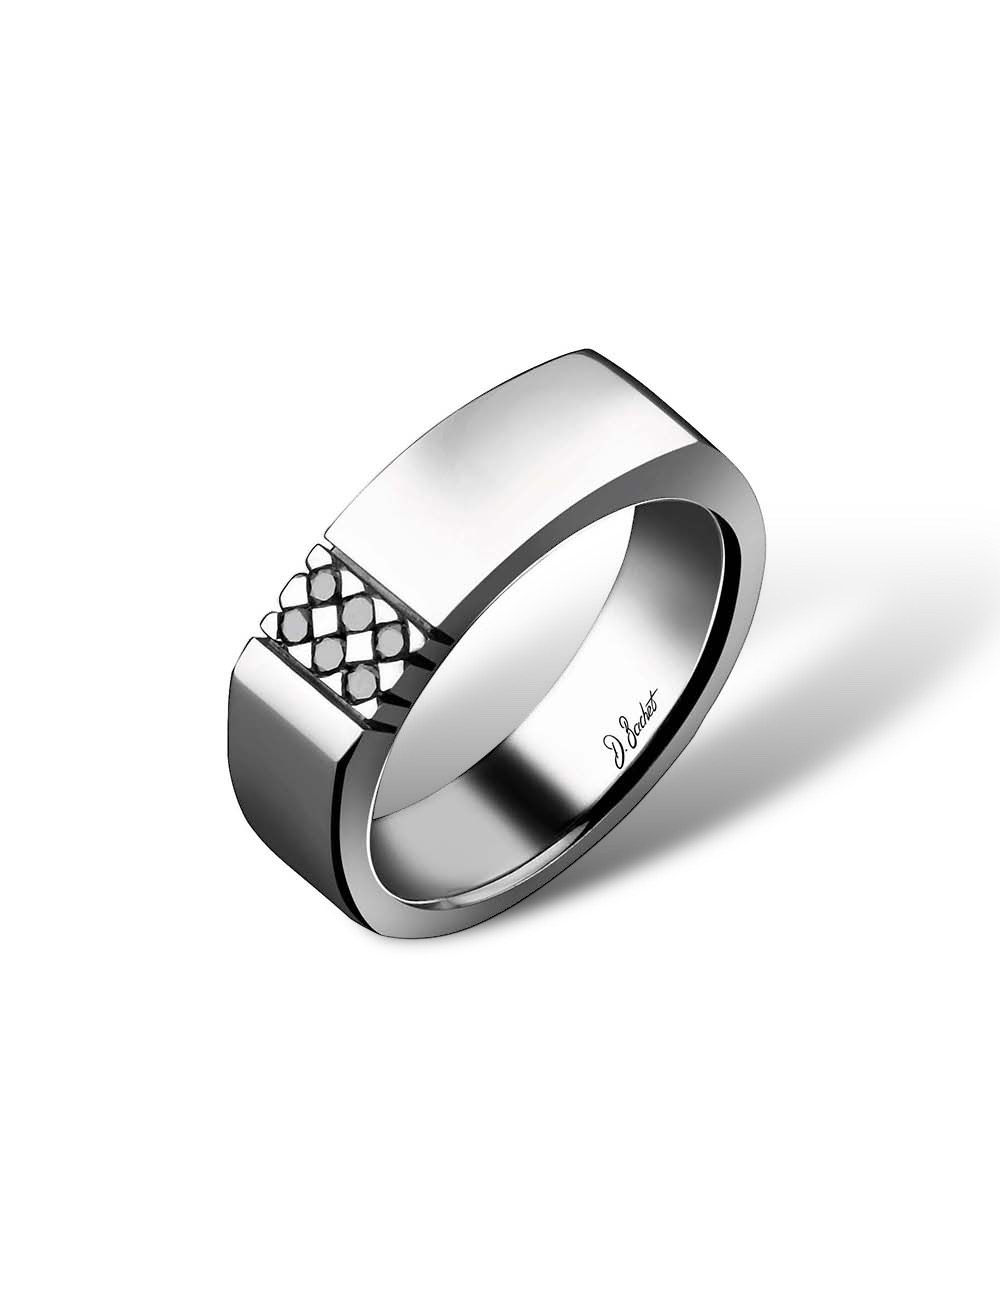 Men's signet ring in platinum with black diamonds, combining refined elegance and bold style for a distinctive look.